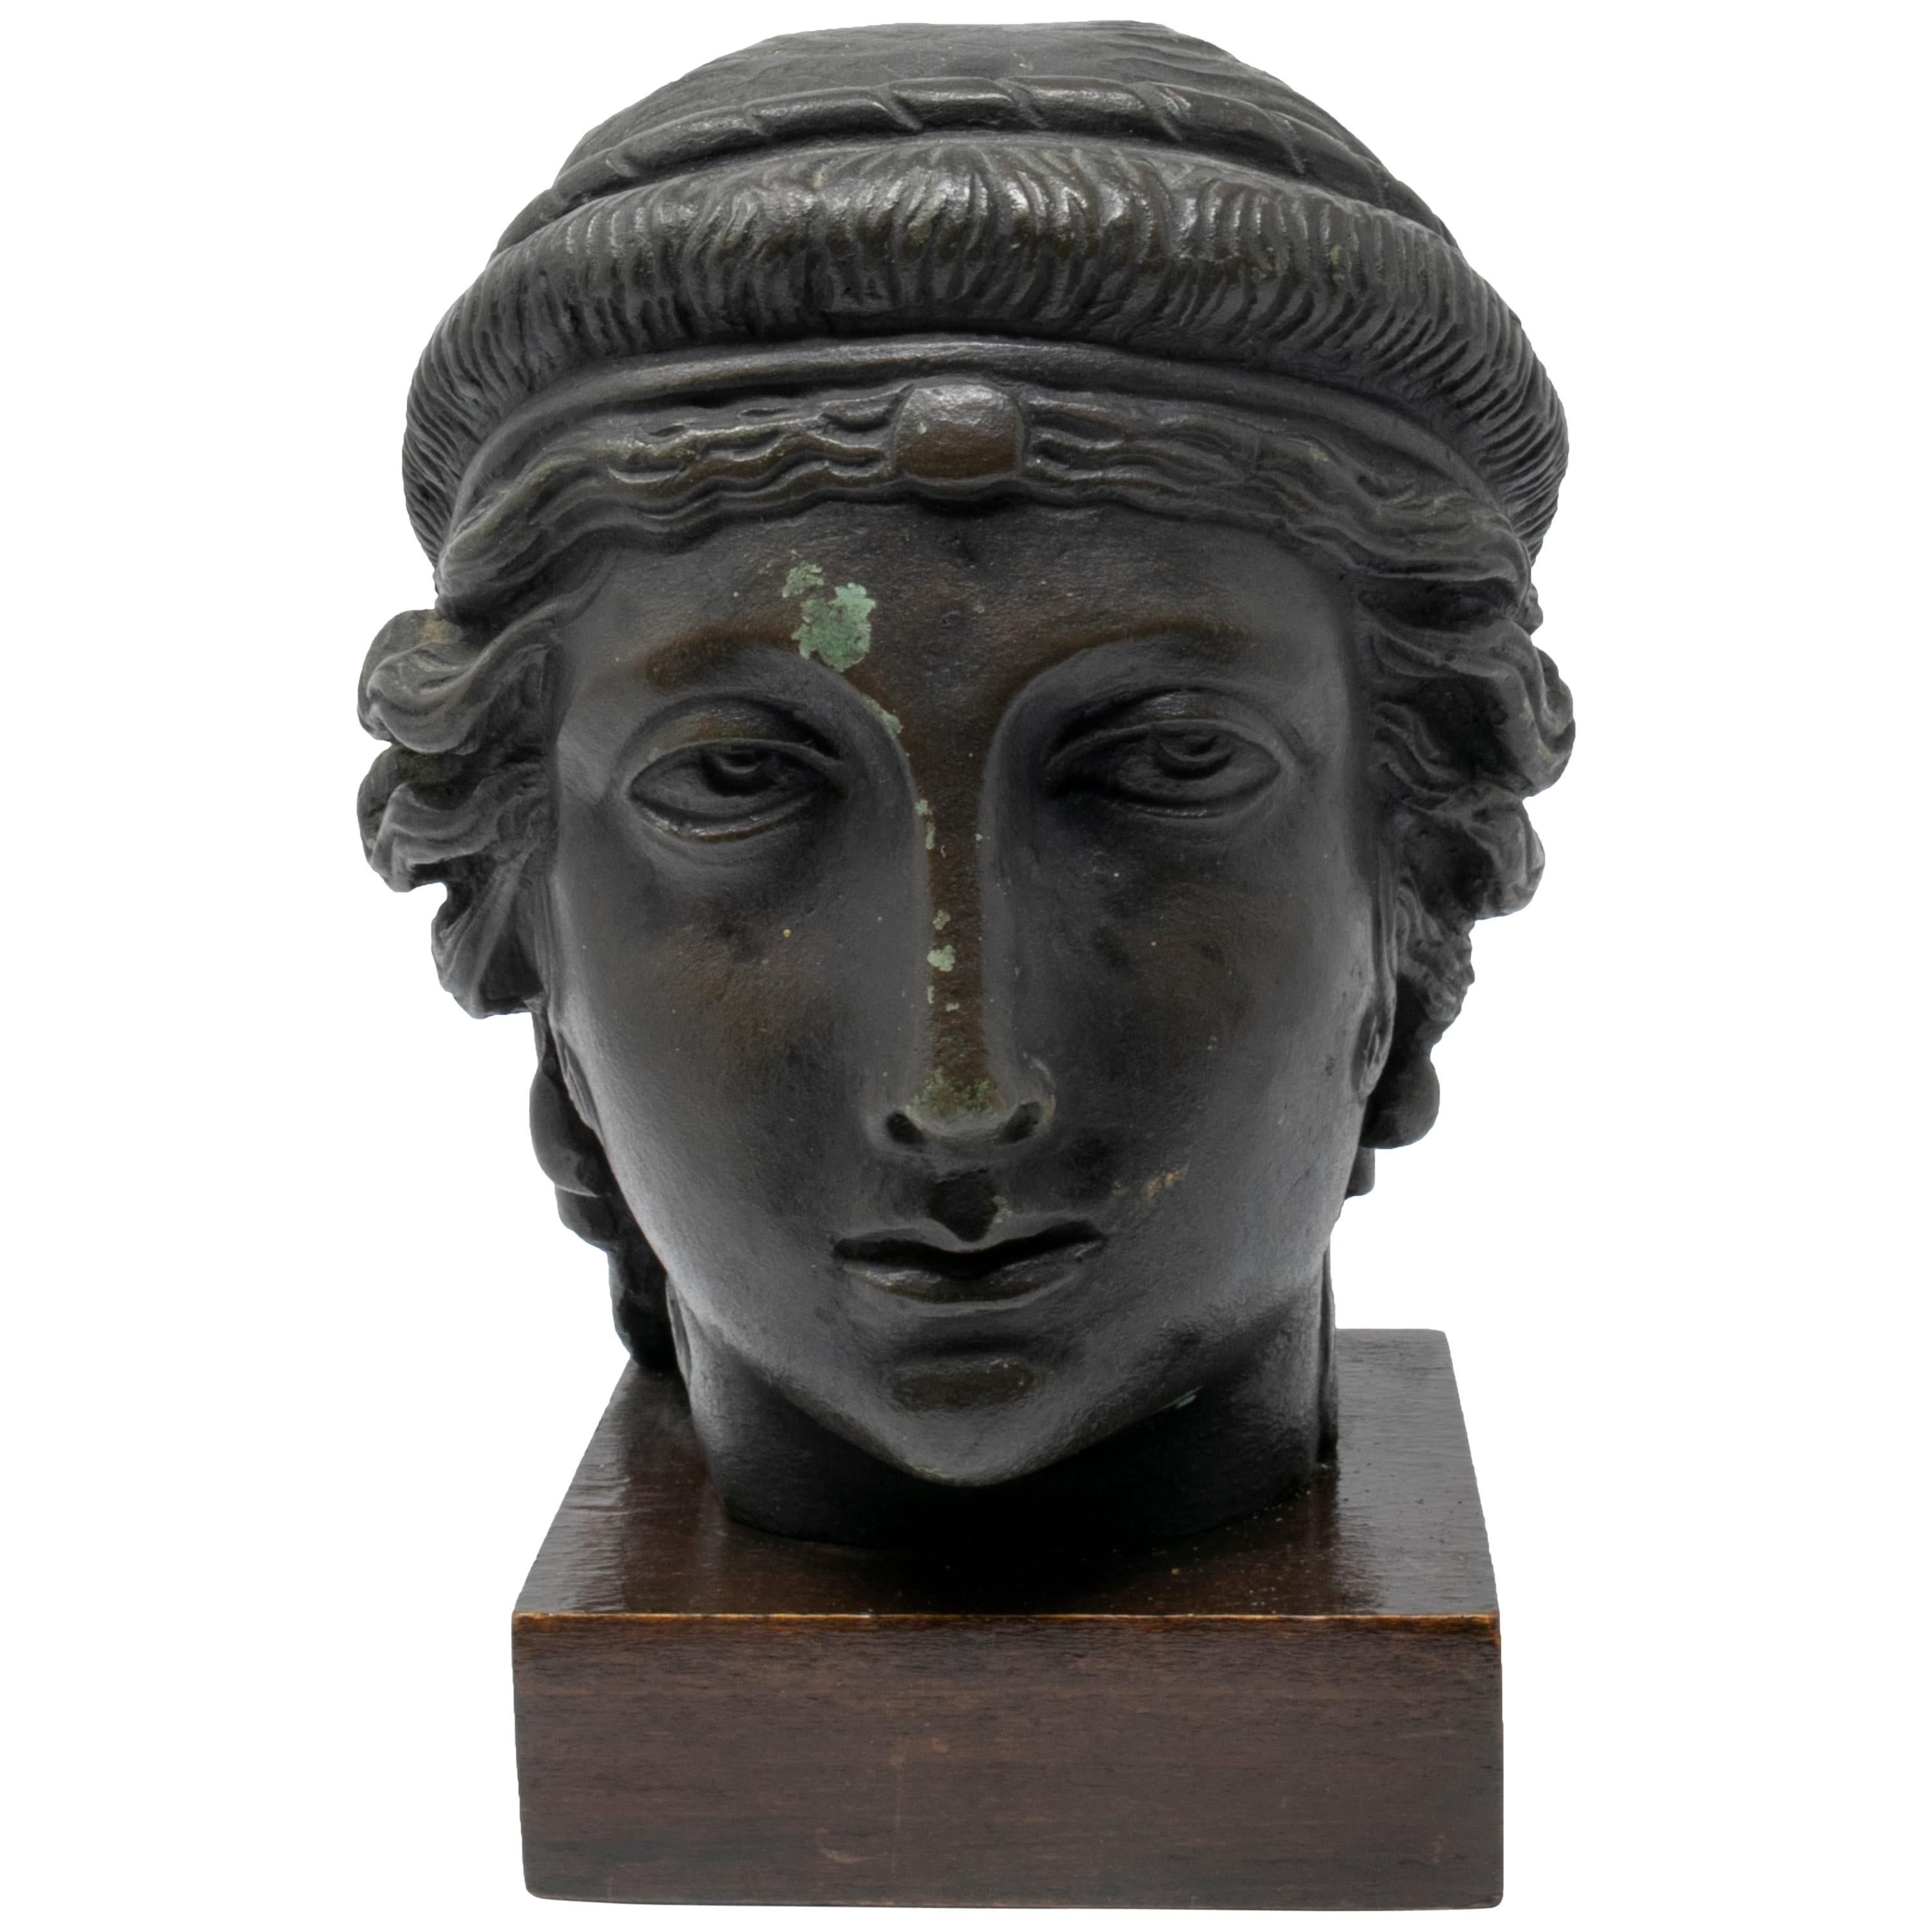 19th Century Italian Classical Greek Bust in Bronze on a Wooden Base